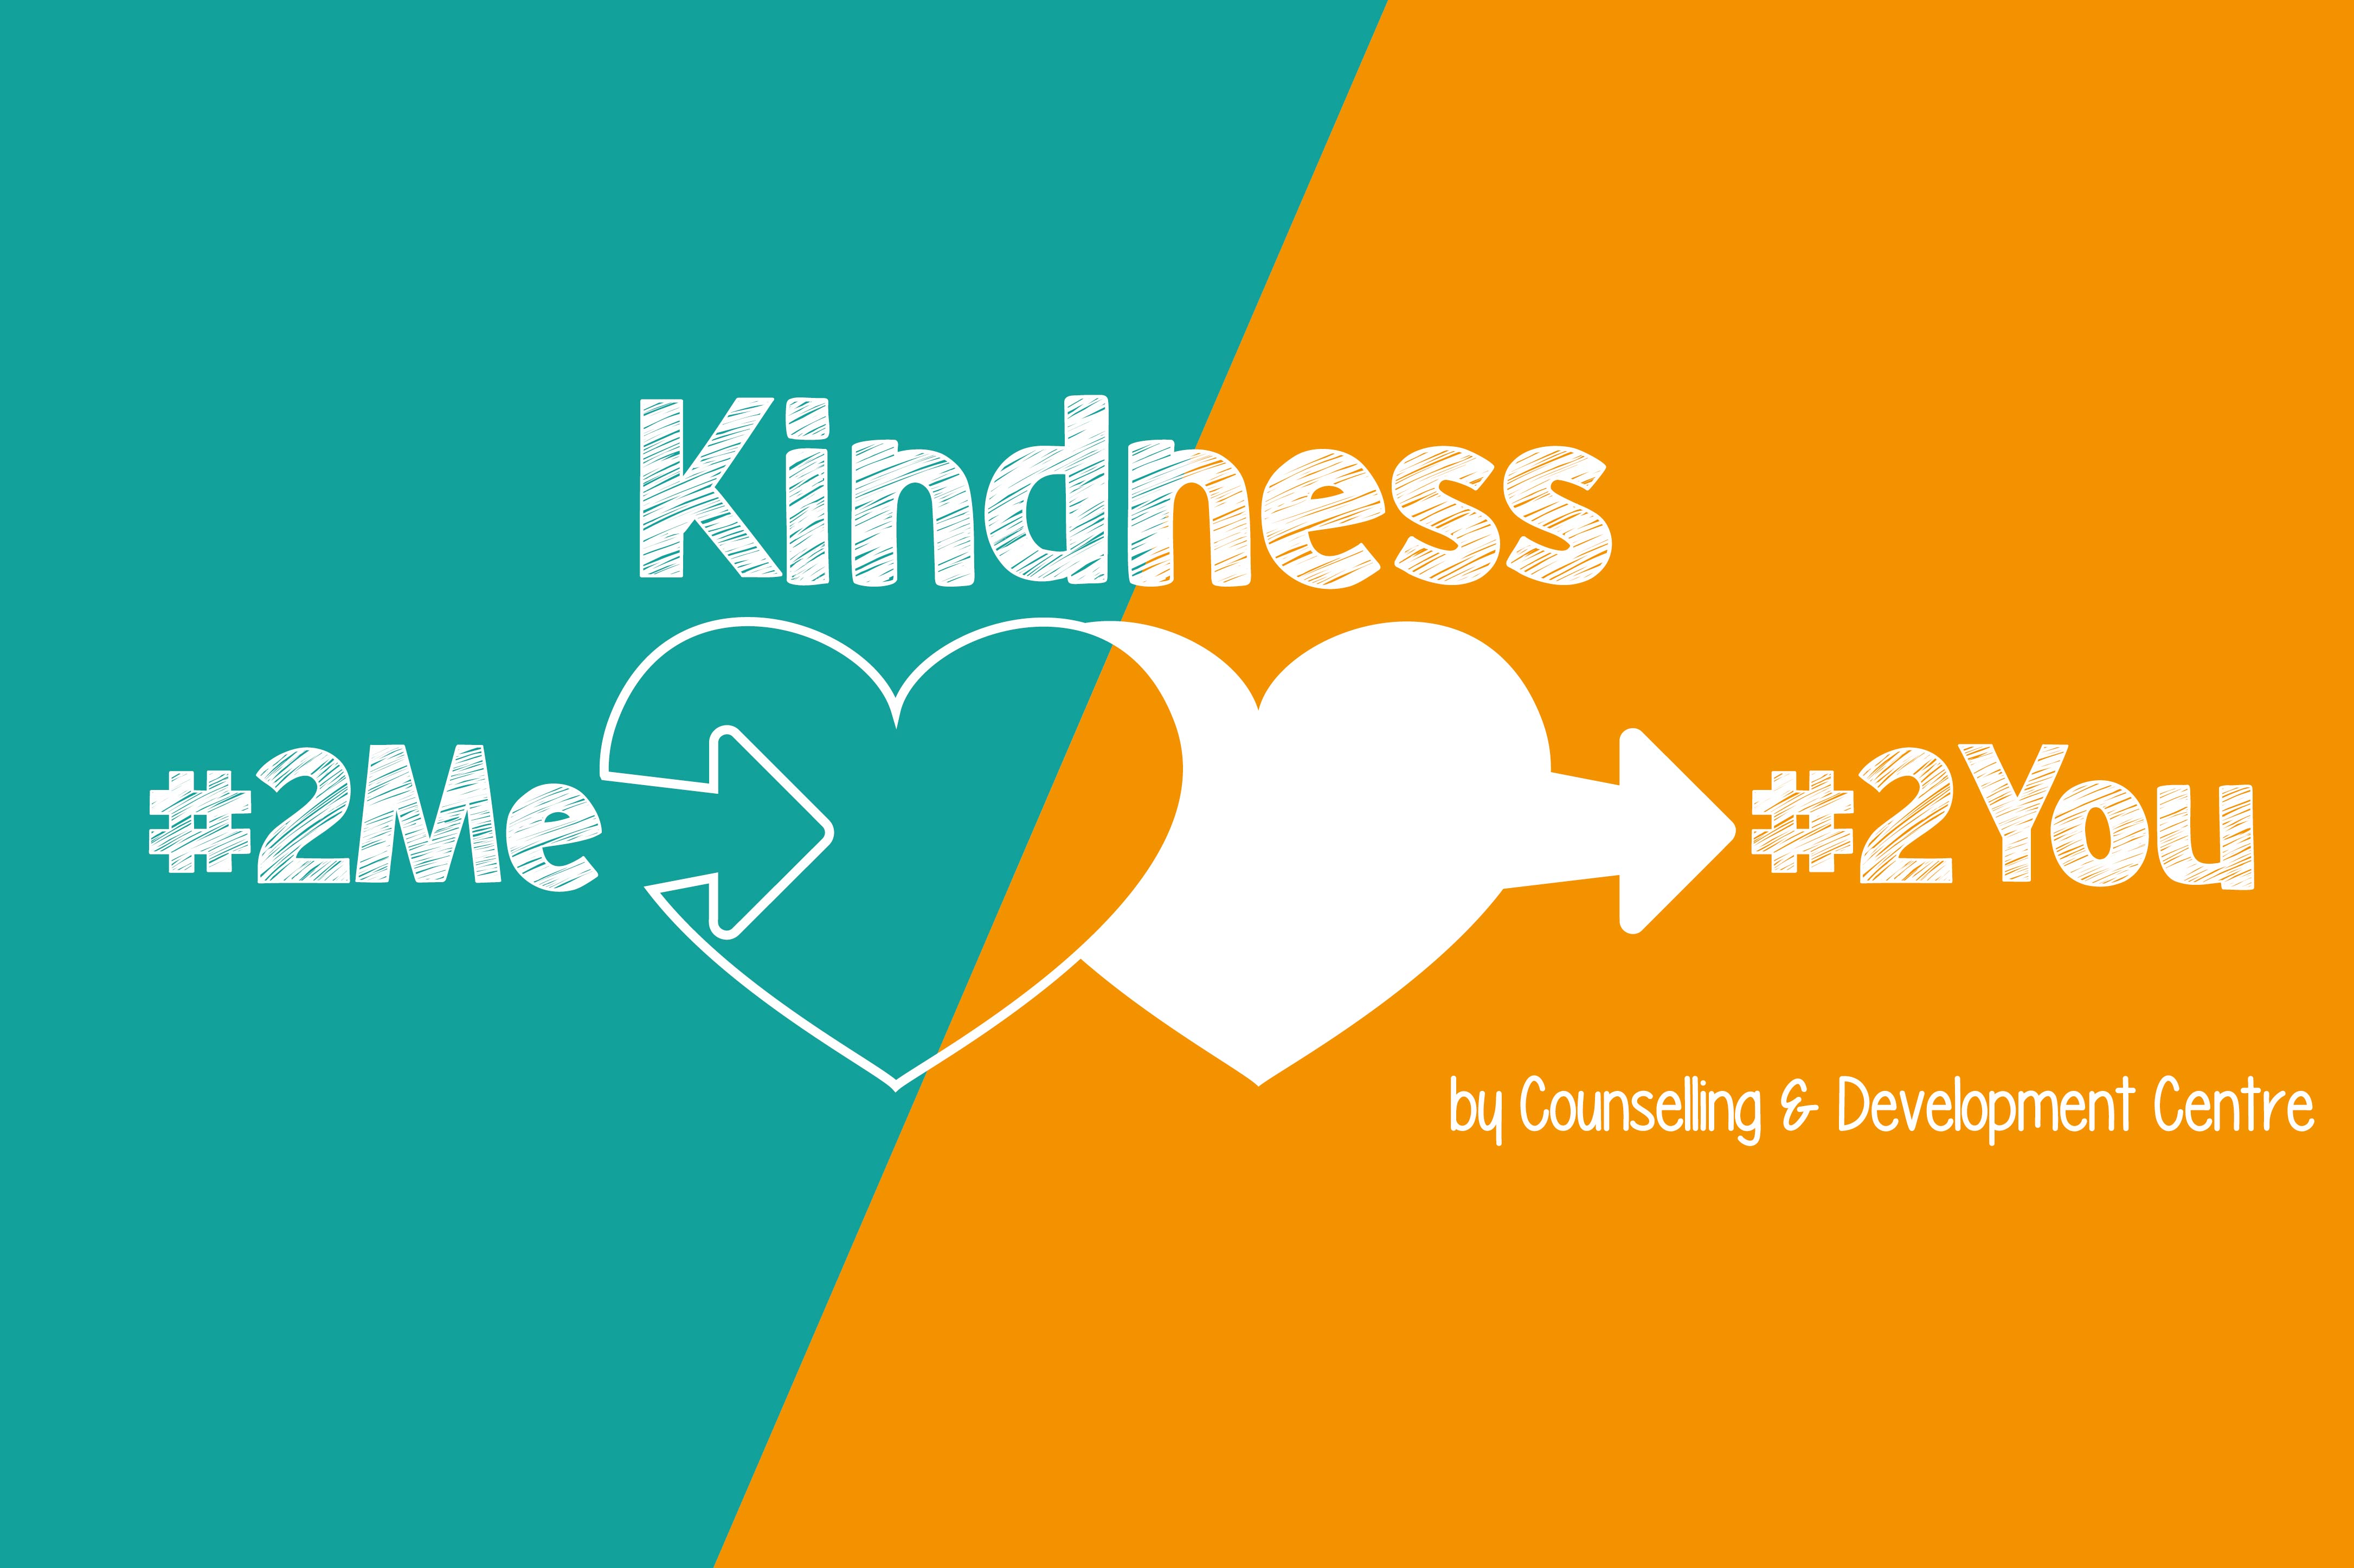 How To Be Kind To Self & Others